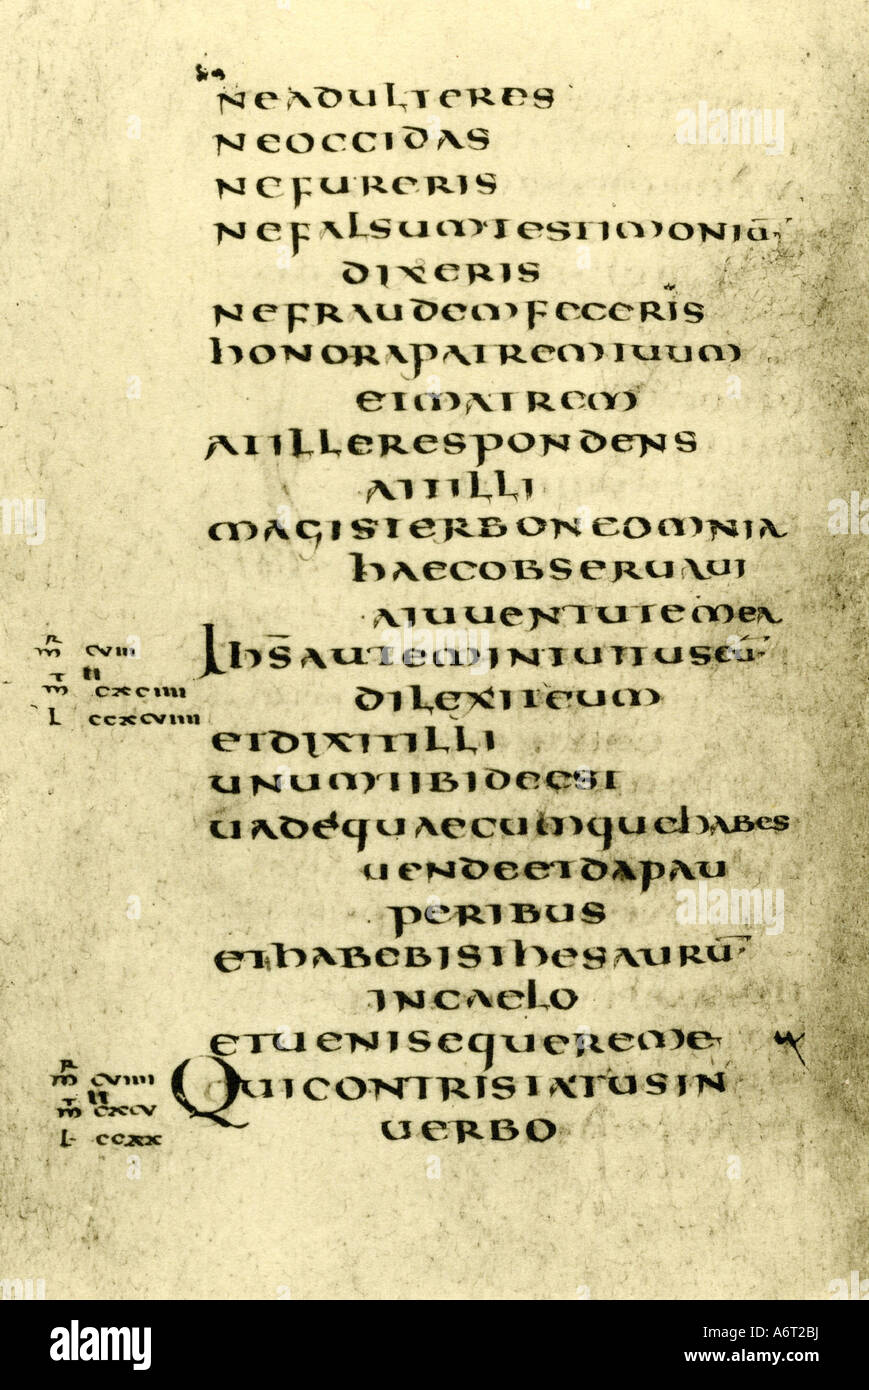 How does the Latin Vulgate compare to the Old Latin Bible?